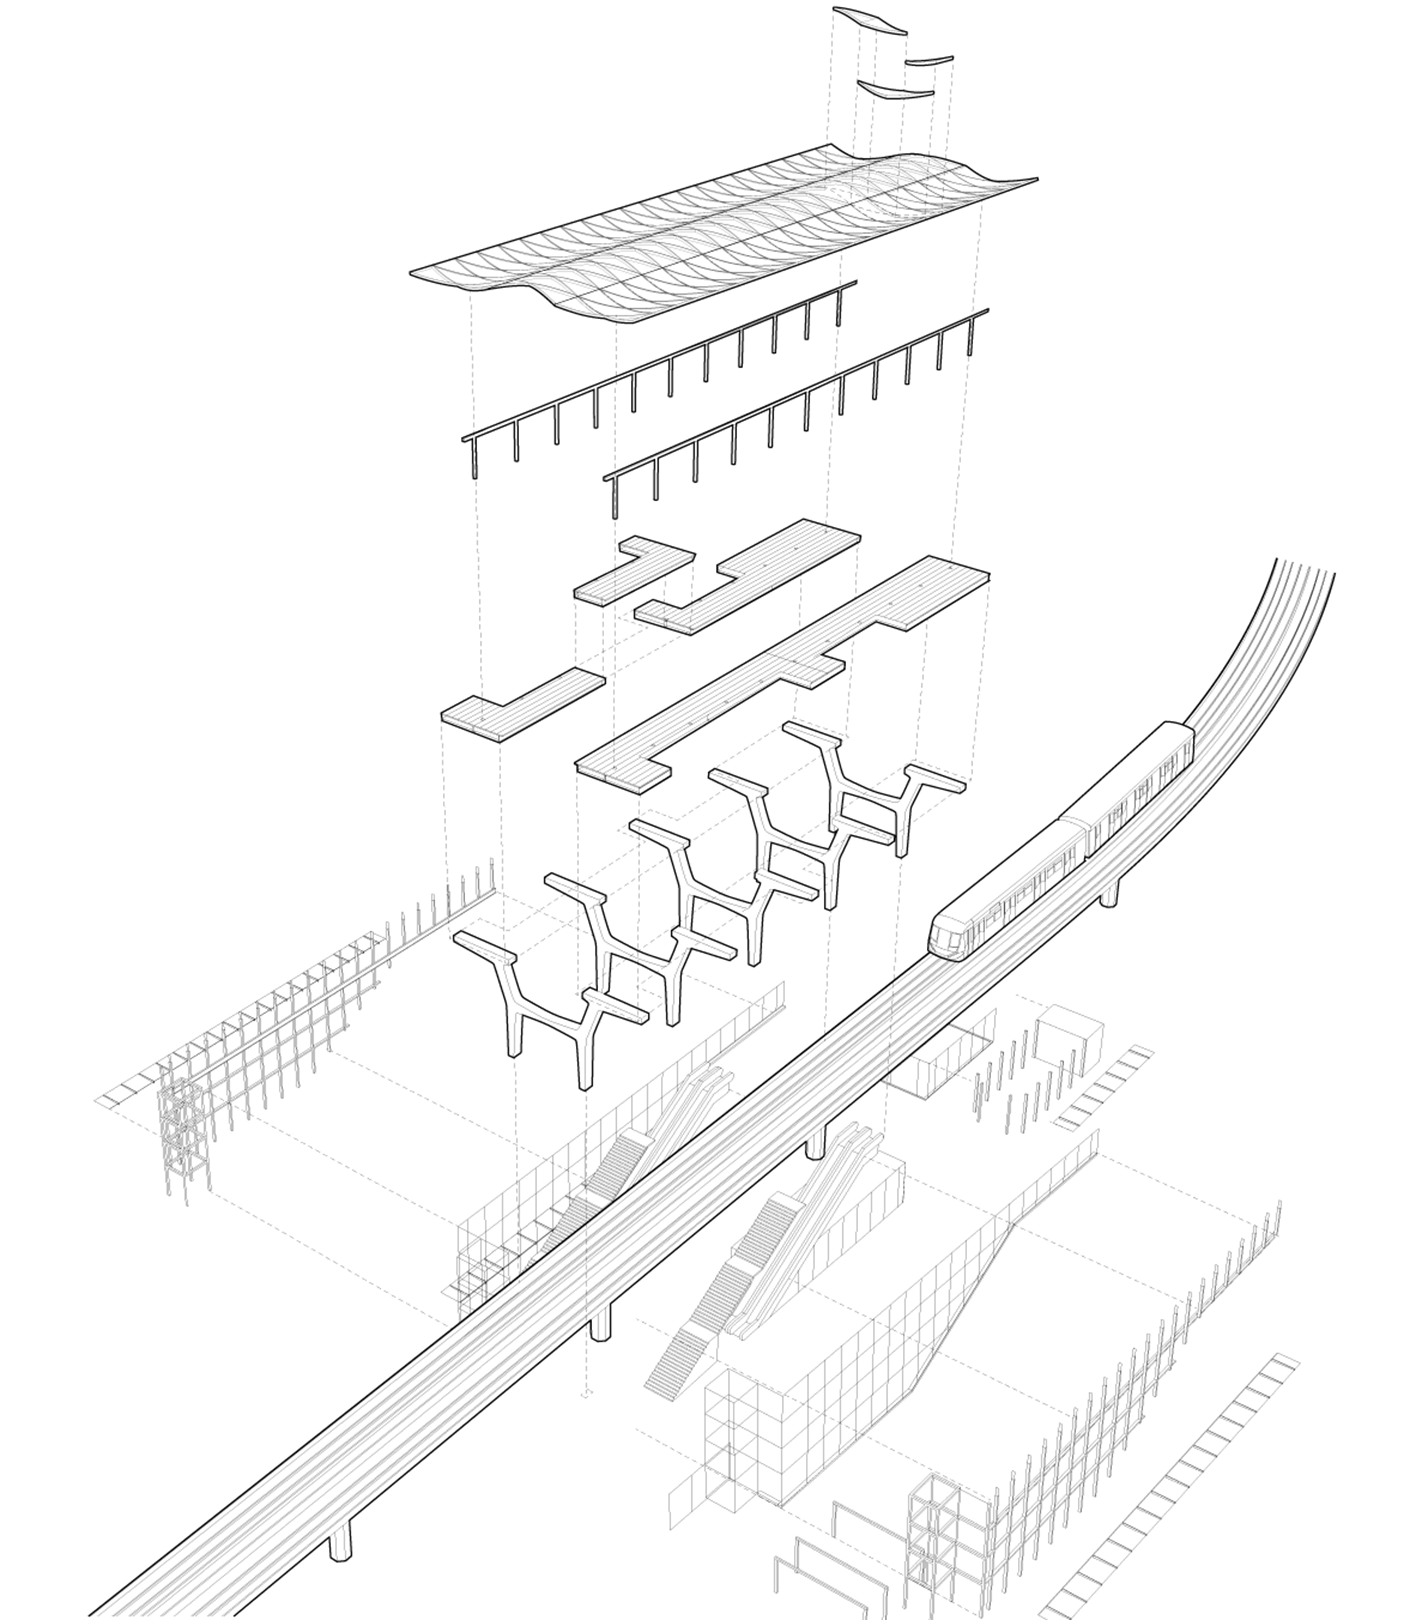 Exploded axonometric on station assembly